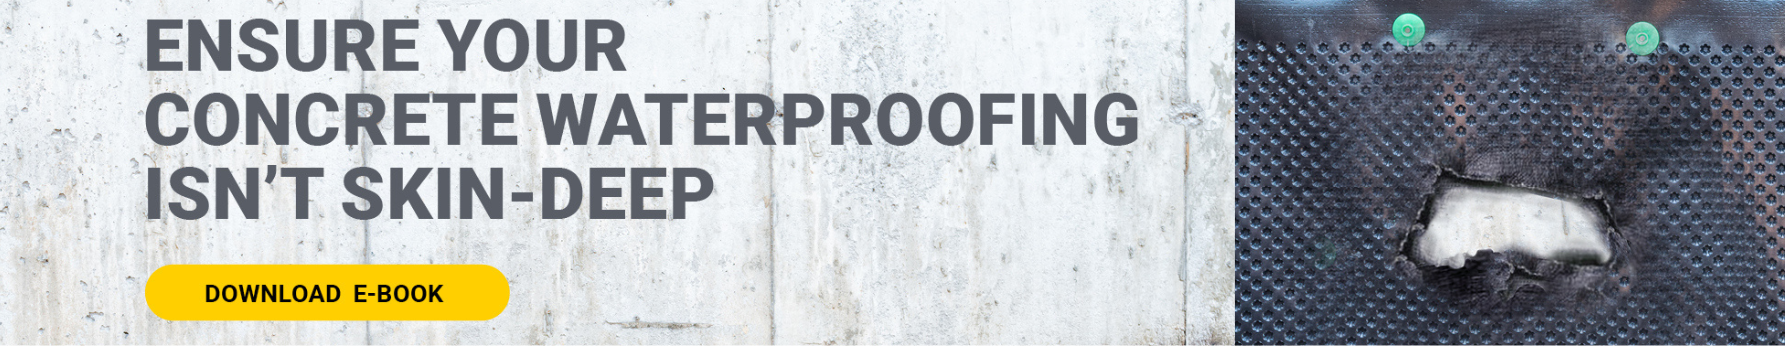 Ensure your concrete waterproofing isn't skin-deep. Click here to download our e-book today.